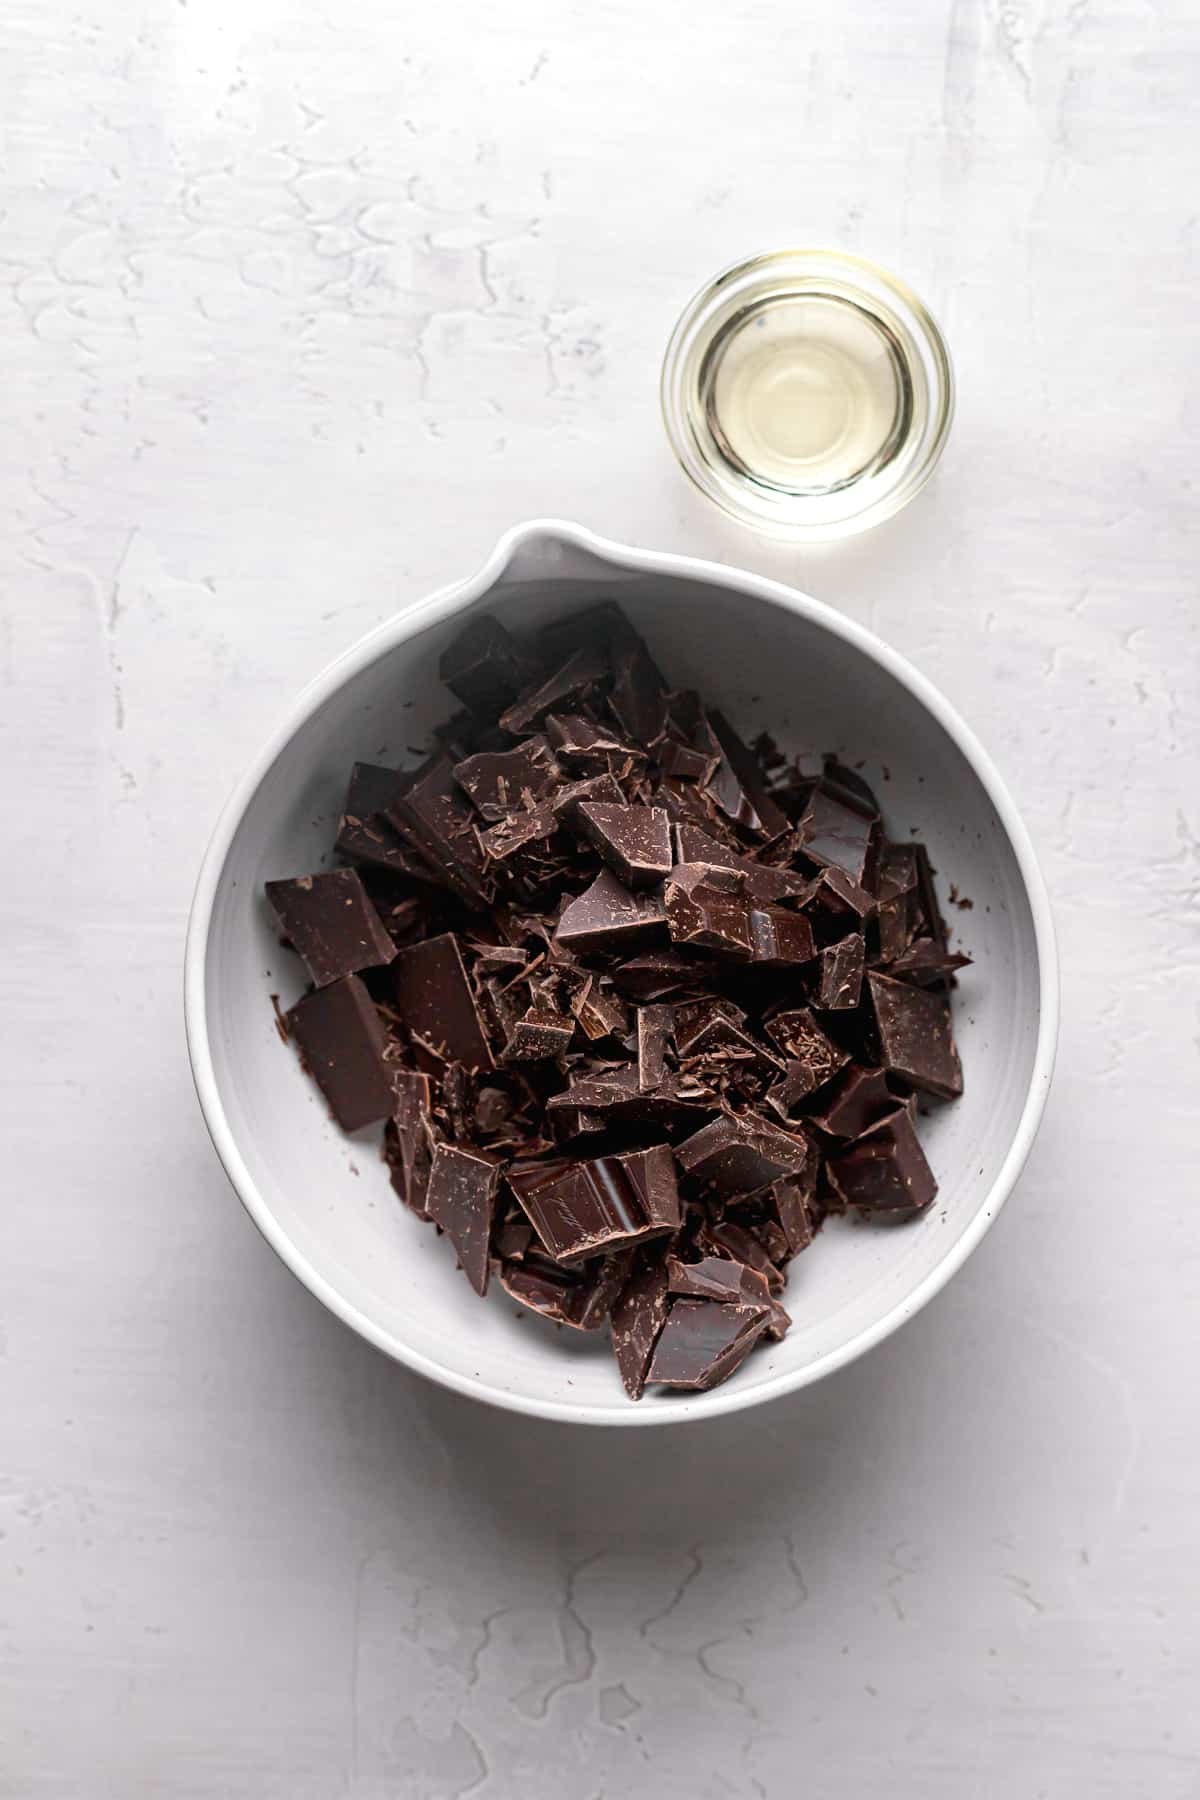 ingredients for chocolate topping.